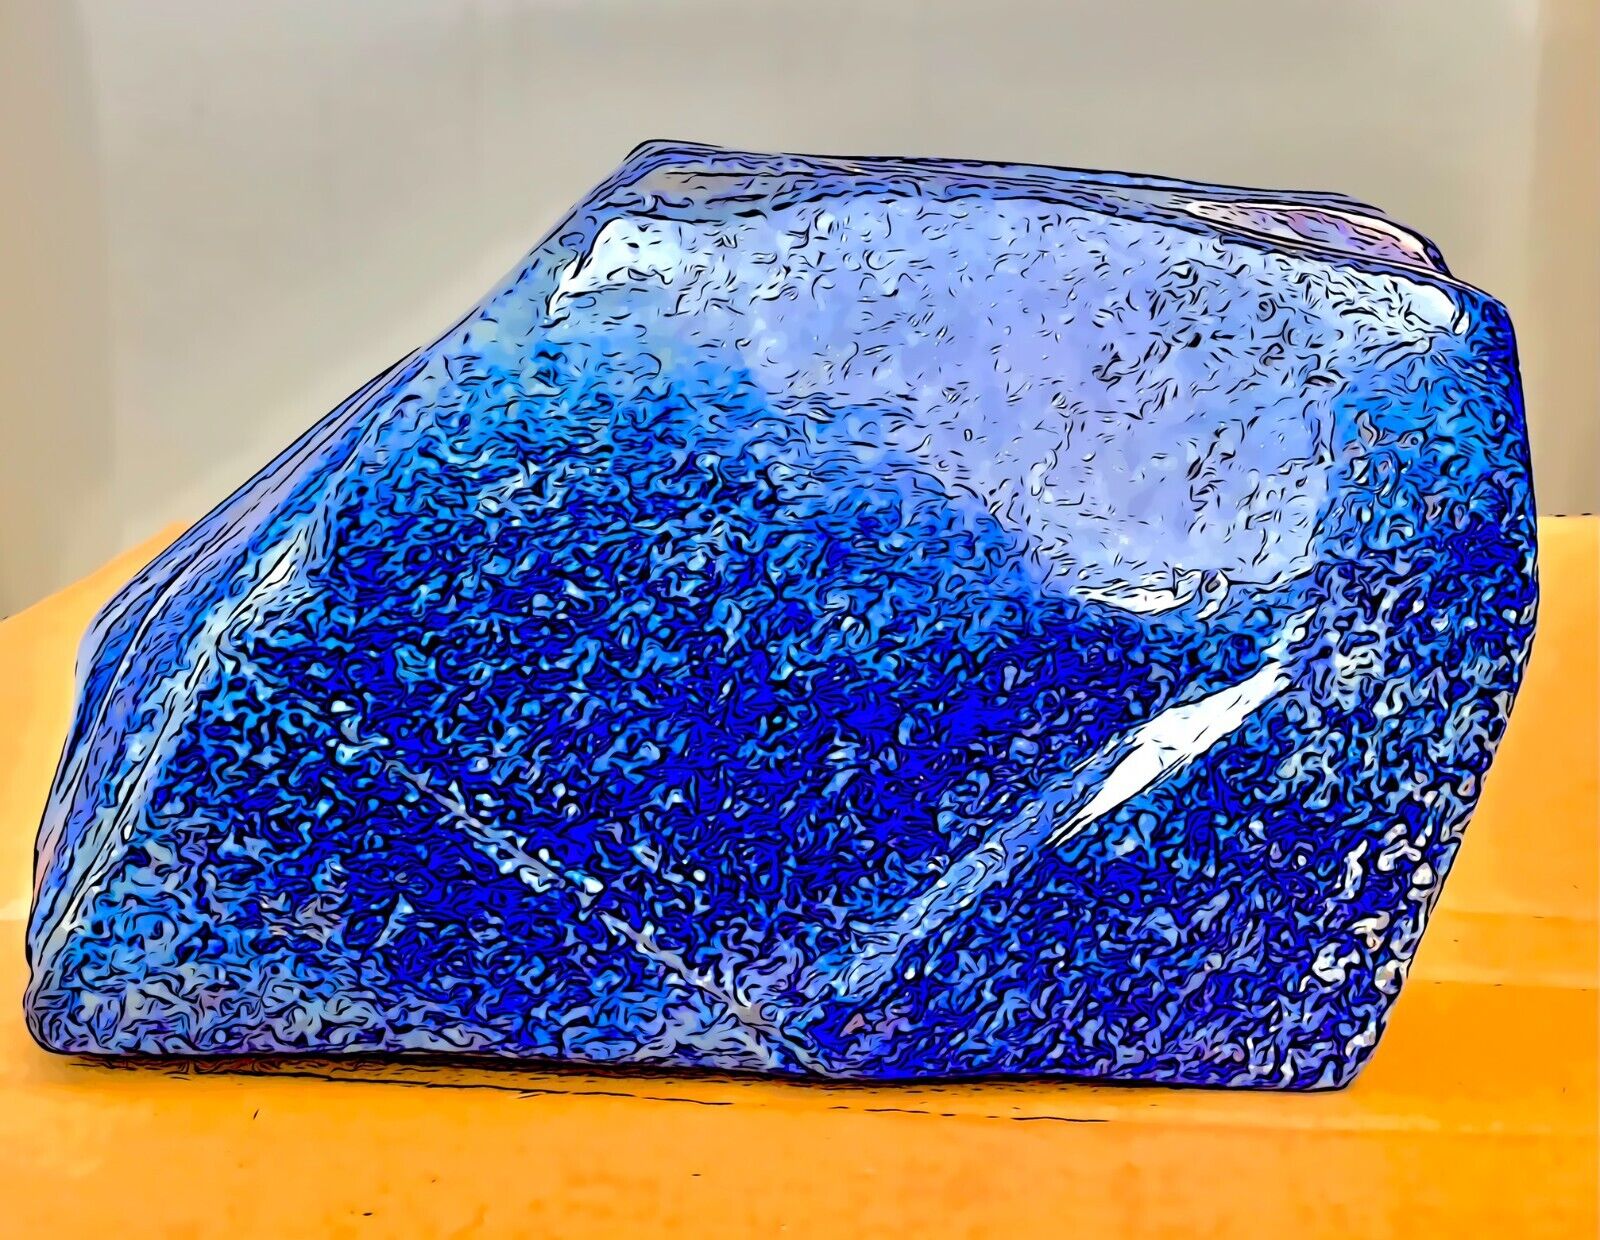 Lapis Polished Specimen  Polished, A-Grade Material 9.4 lbs., 7.5x5inx2.4in